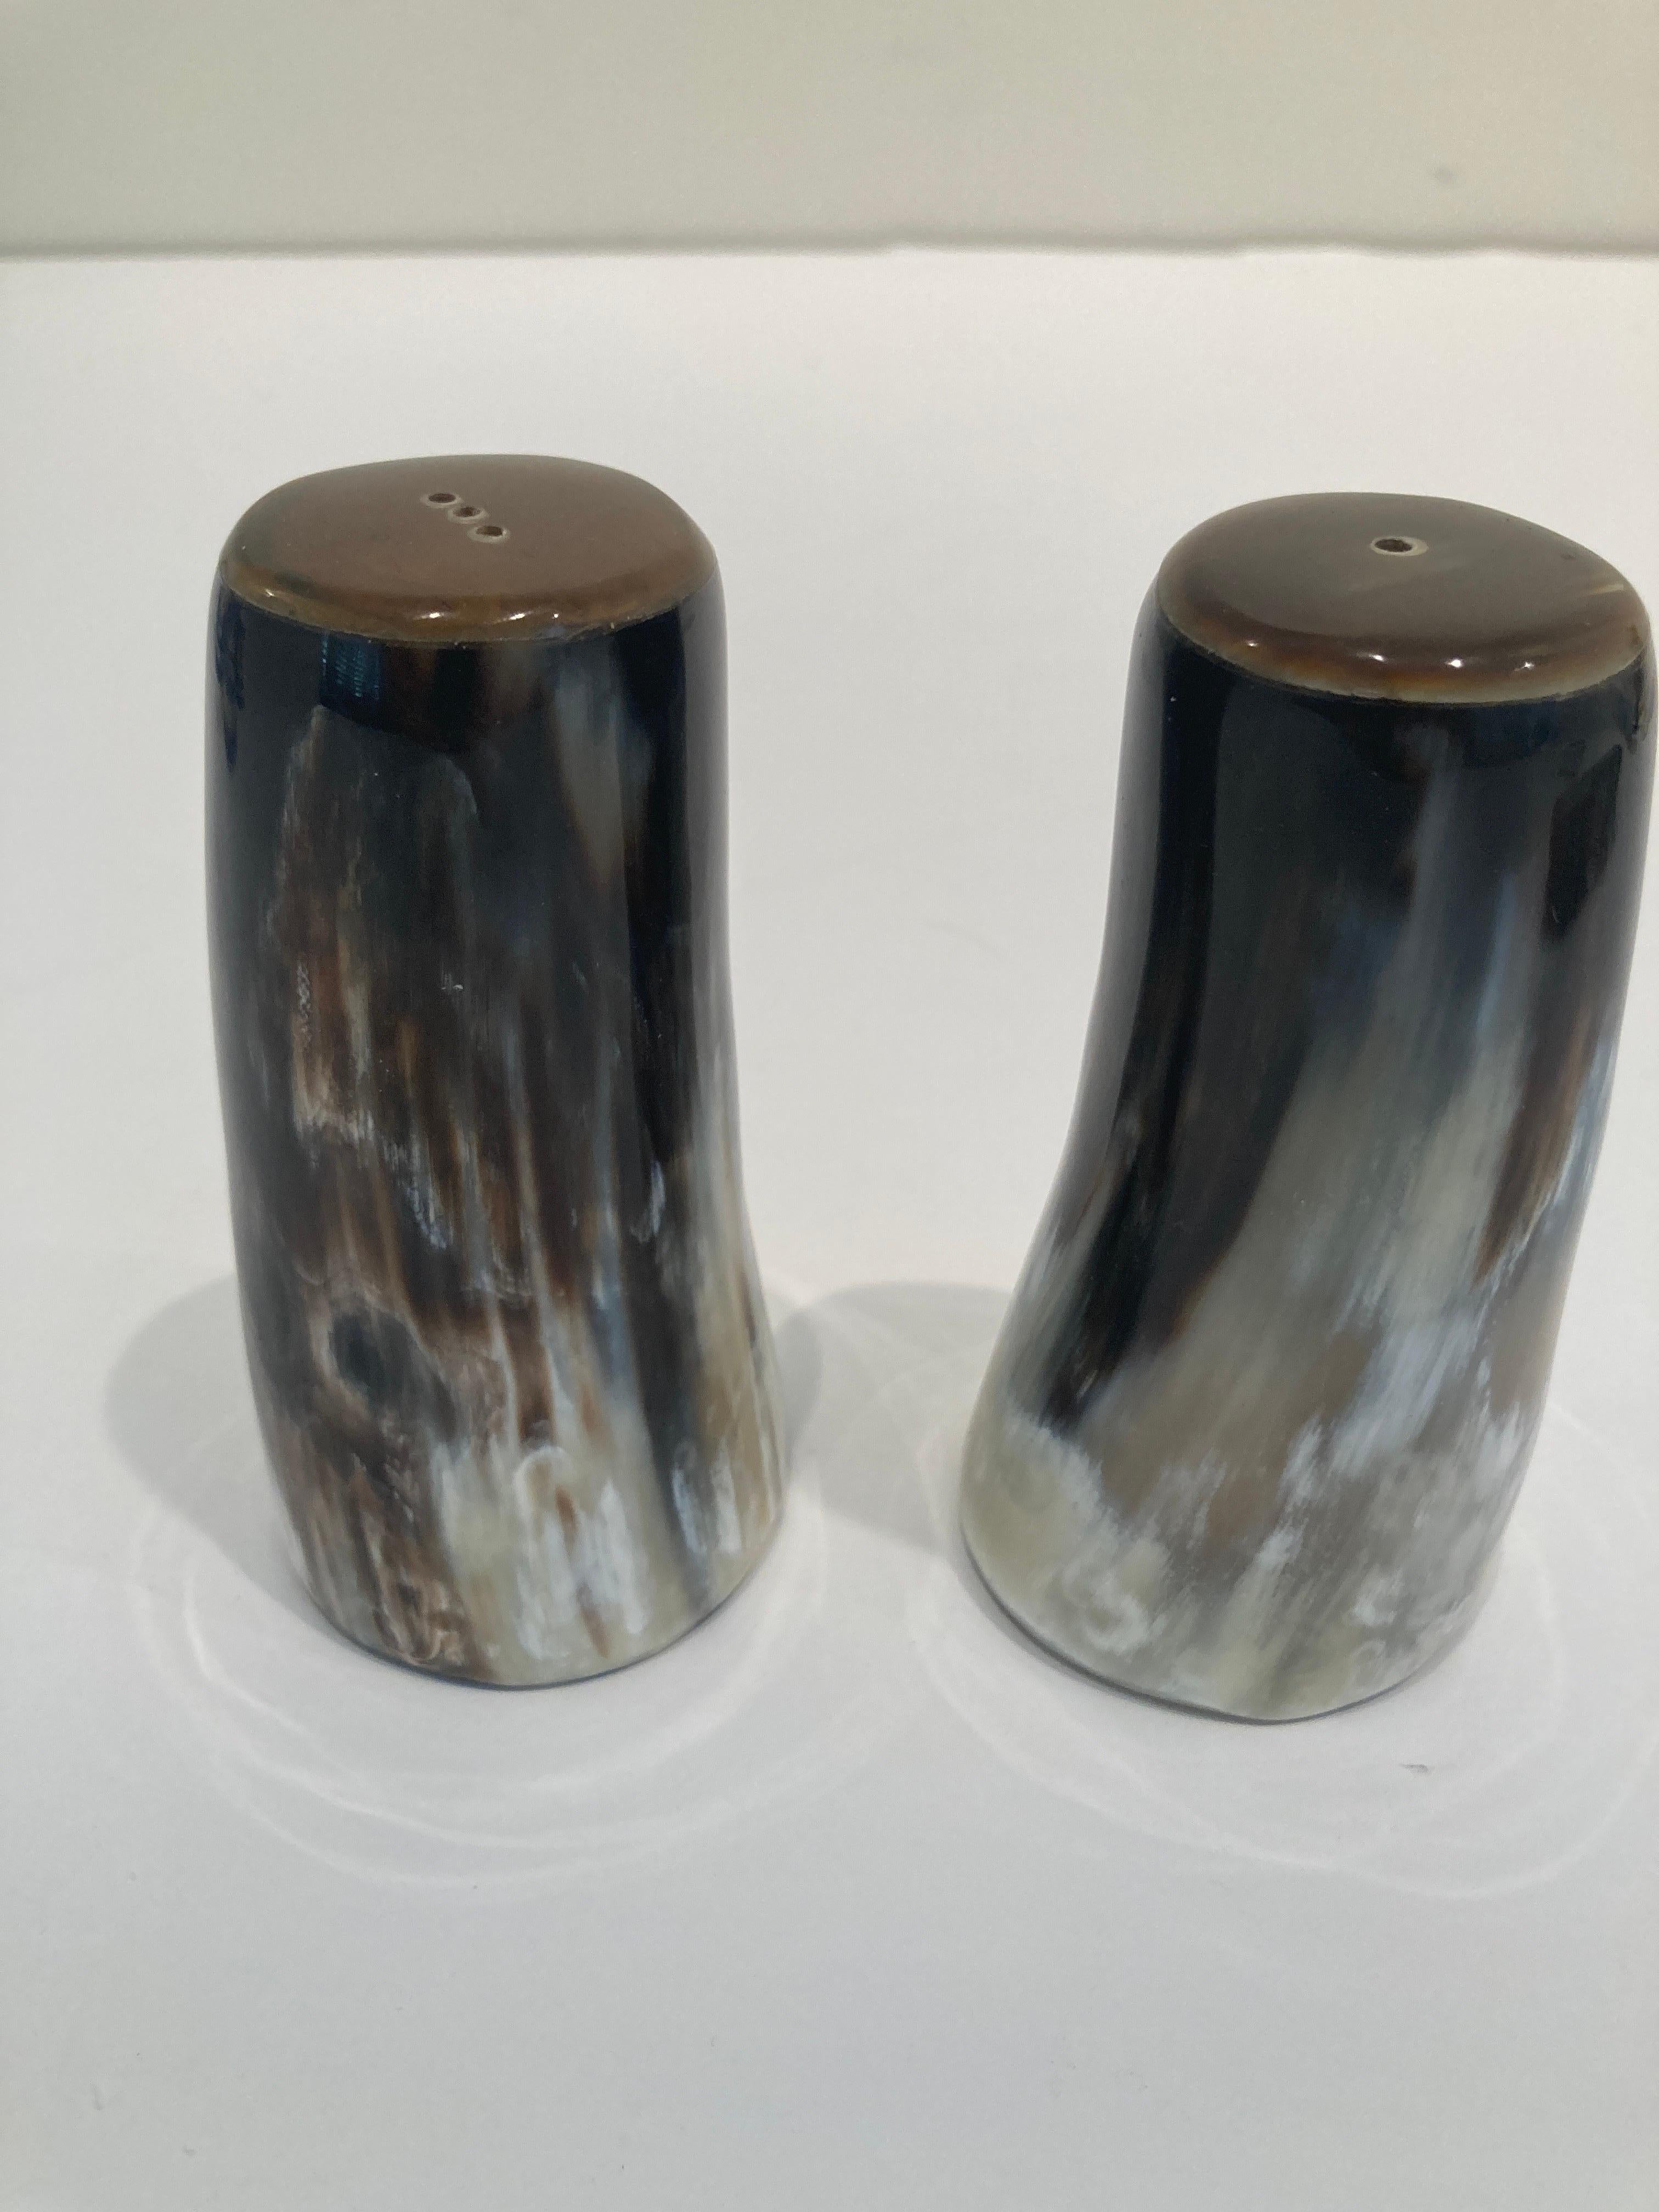 Vintage Set of two salt and pepper shakers showcasing the natural beauty of water buffalo horn. Using sustainable and traditional practices, handcrafted by skilled artisans in India. 
These natural horn Salt and Pepper Shaker Set will add an